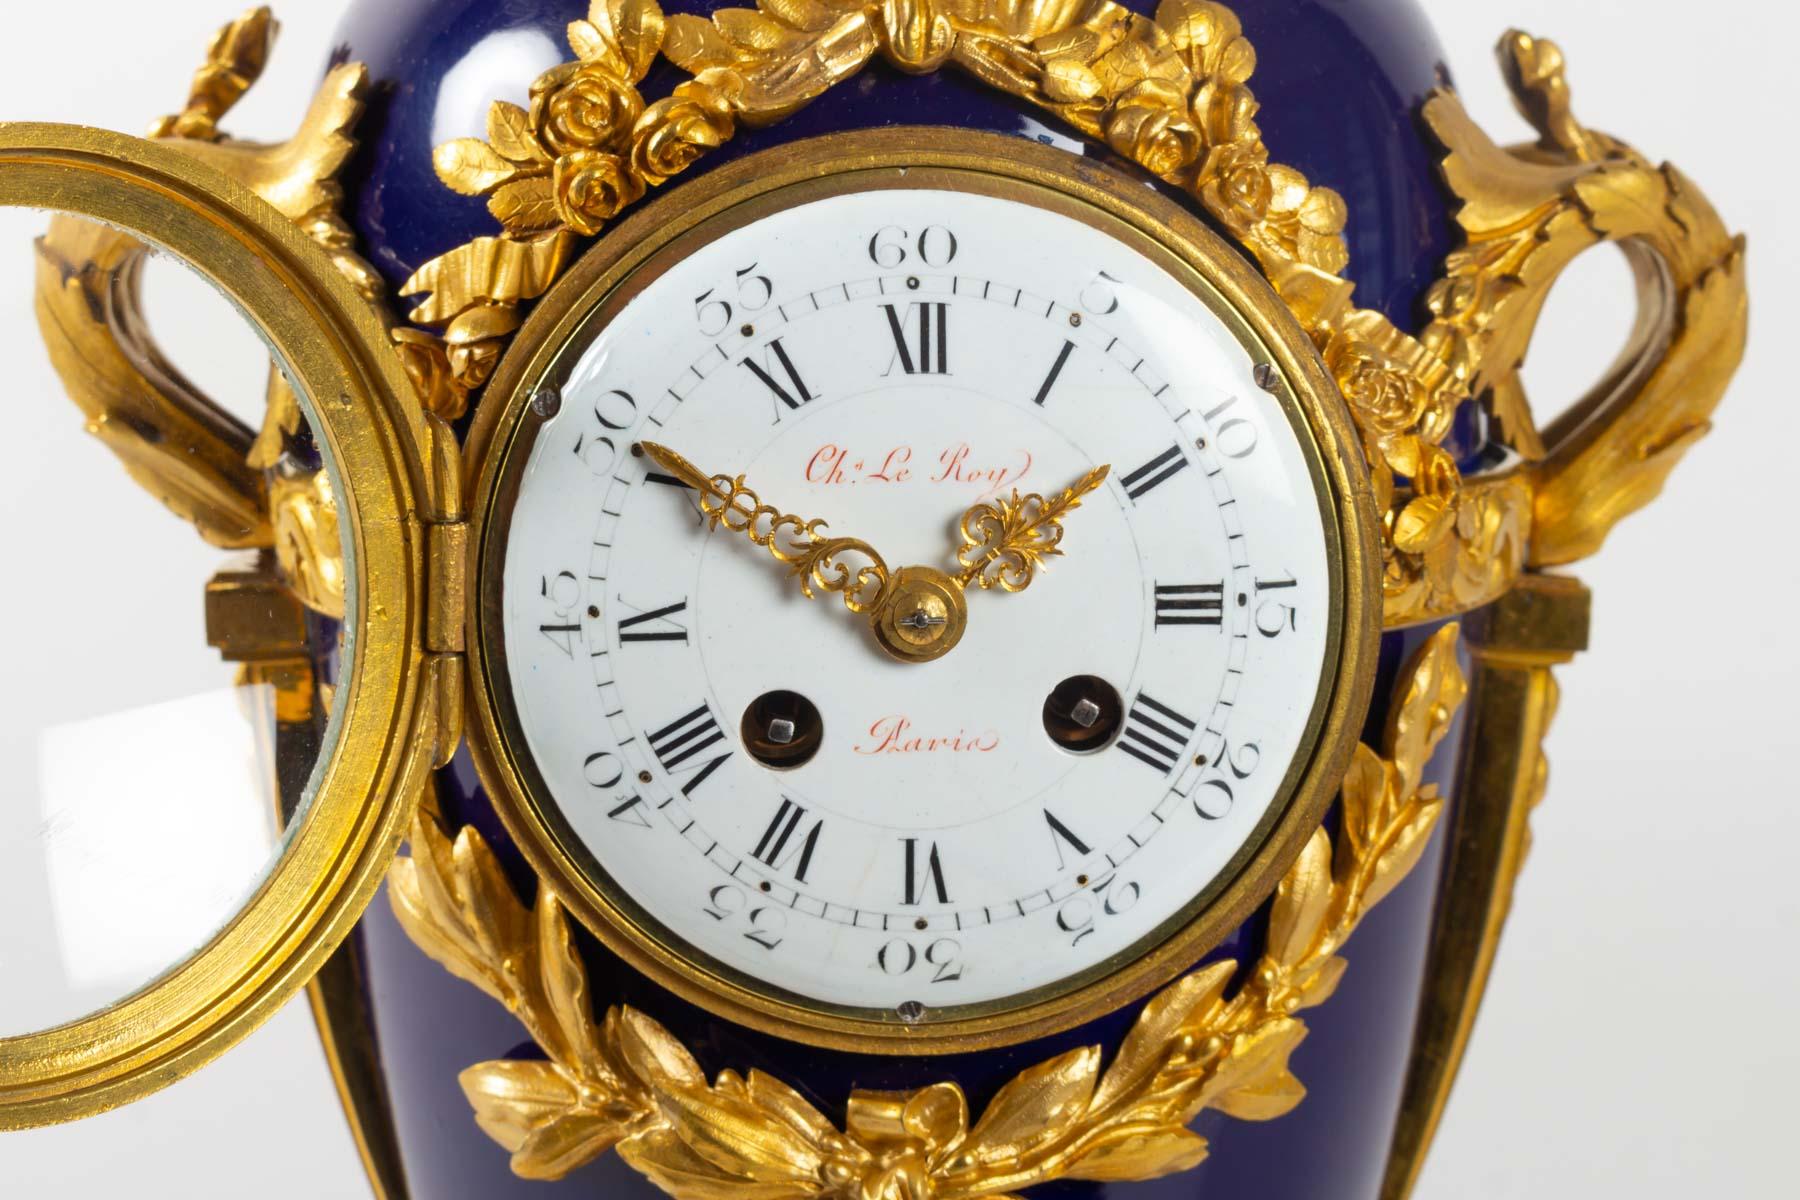 Superb Clock, Giltbronze and Blue Enamel by Beurdeley, Paris, France, circa 1850 In Good Condition For Sale In Saint-Ouen, FR